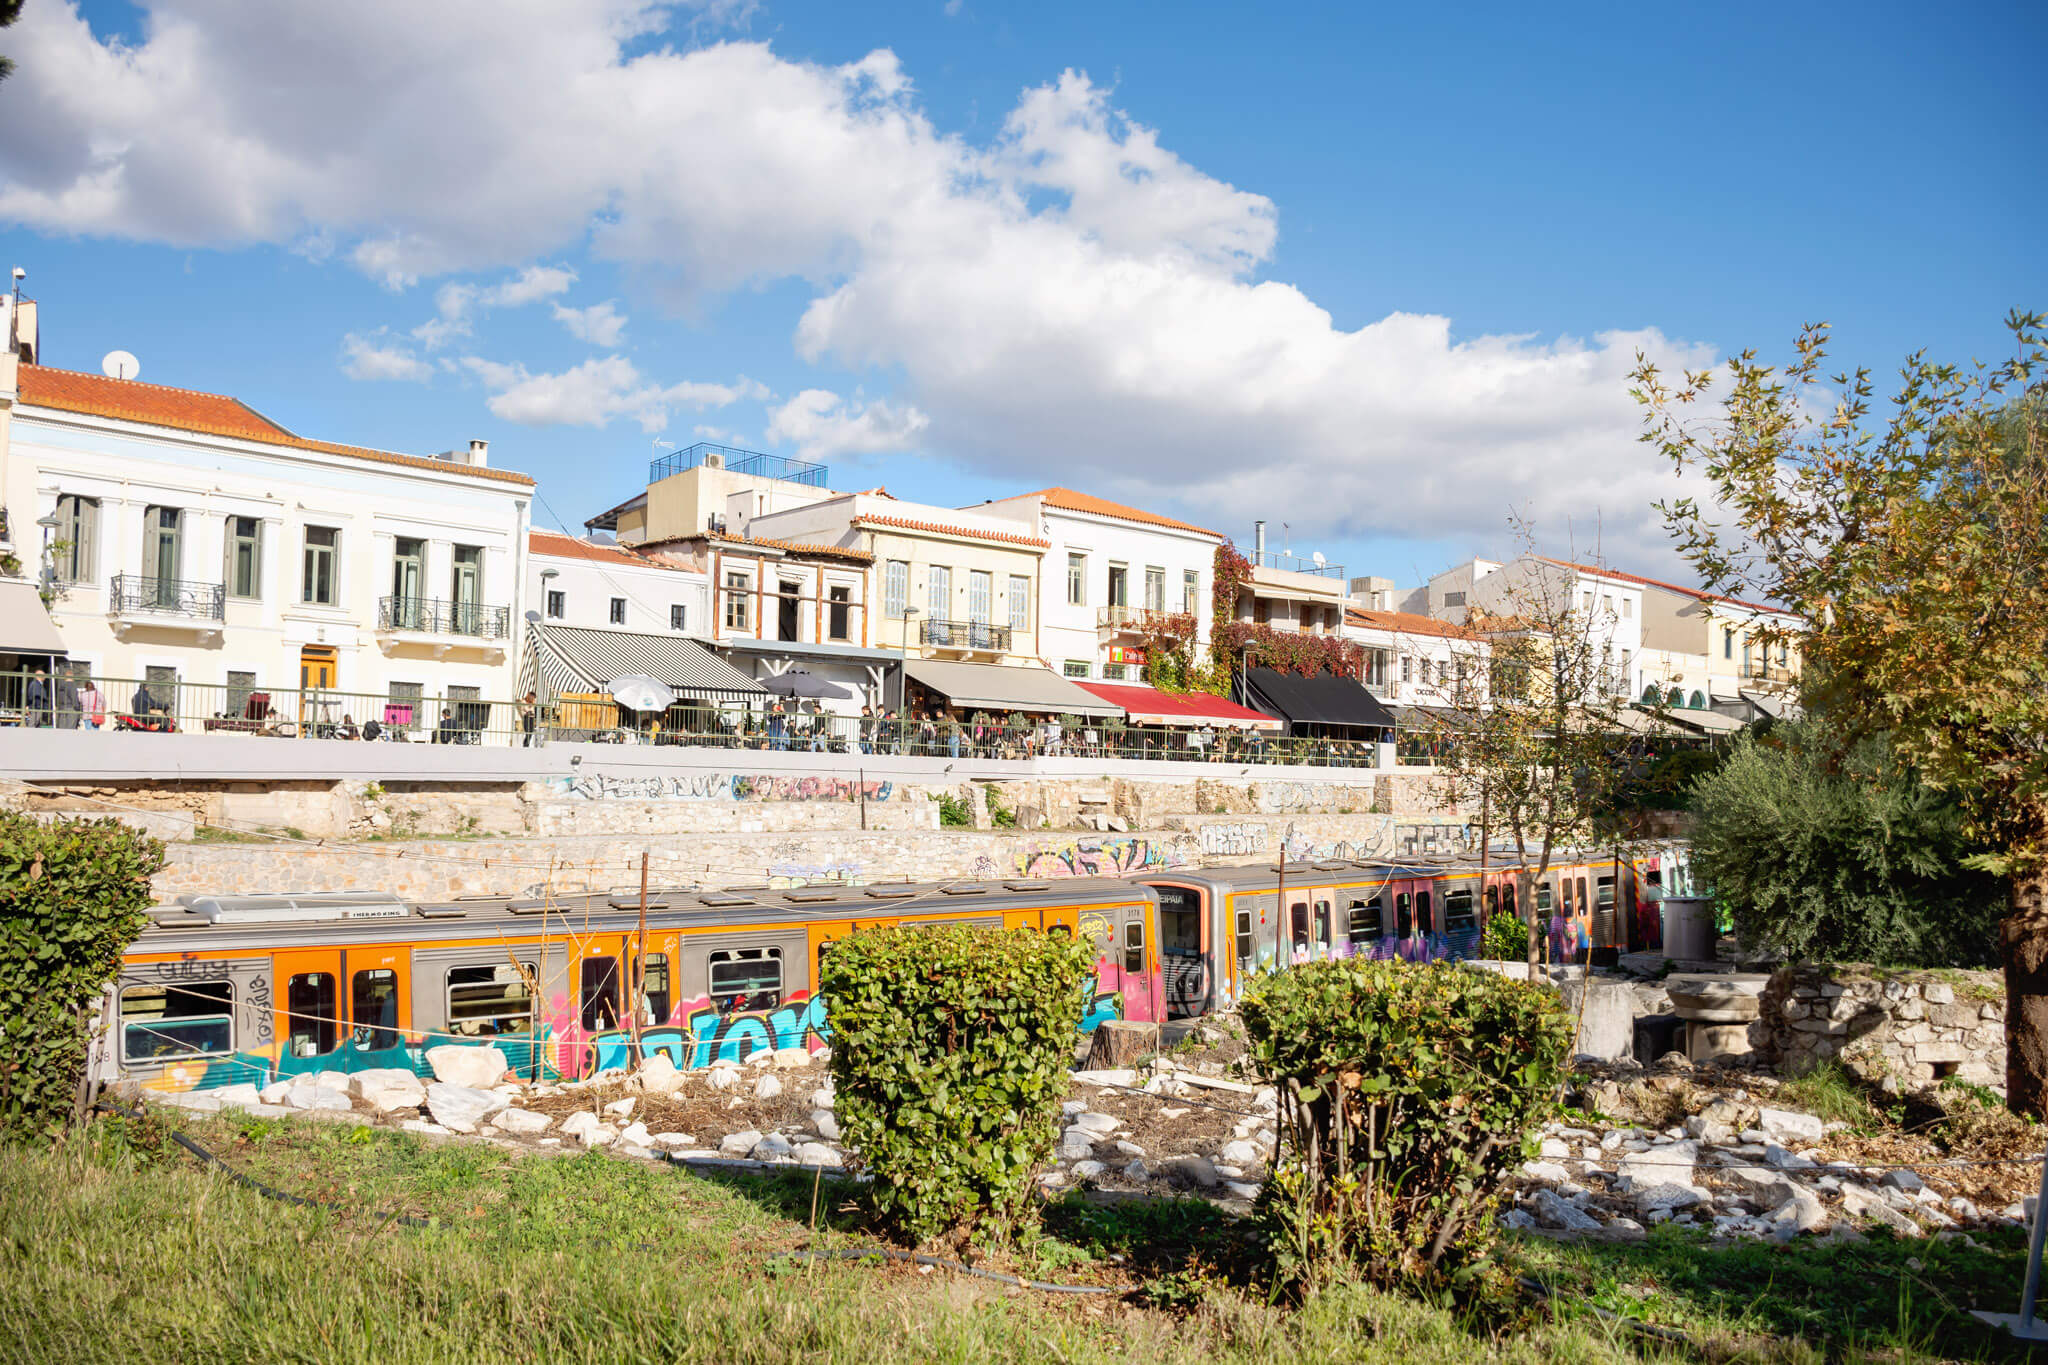 Train passing by the Ancient Greek Agora